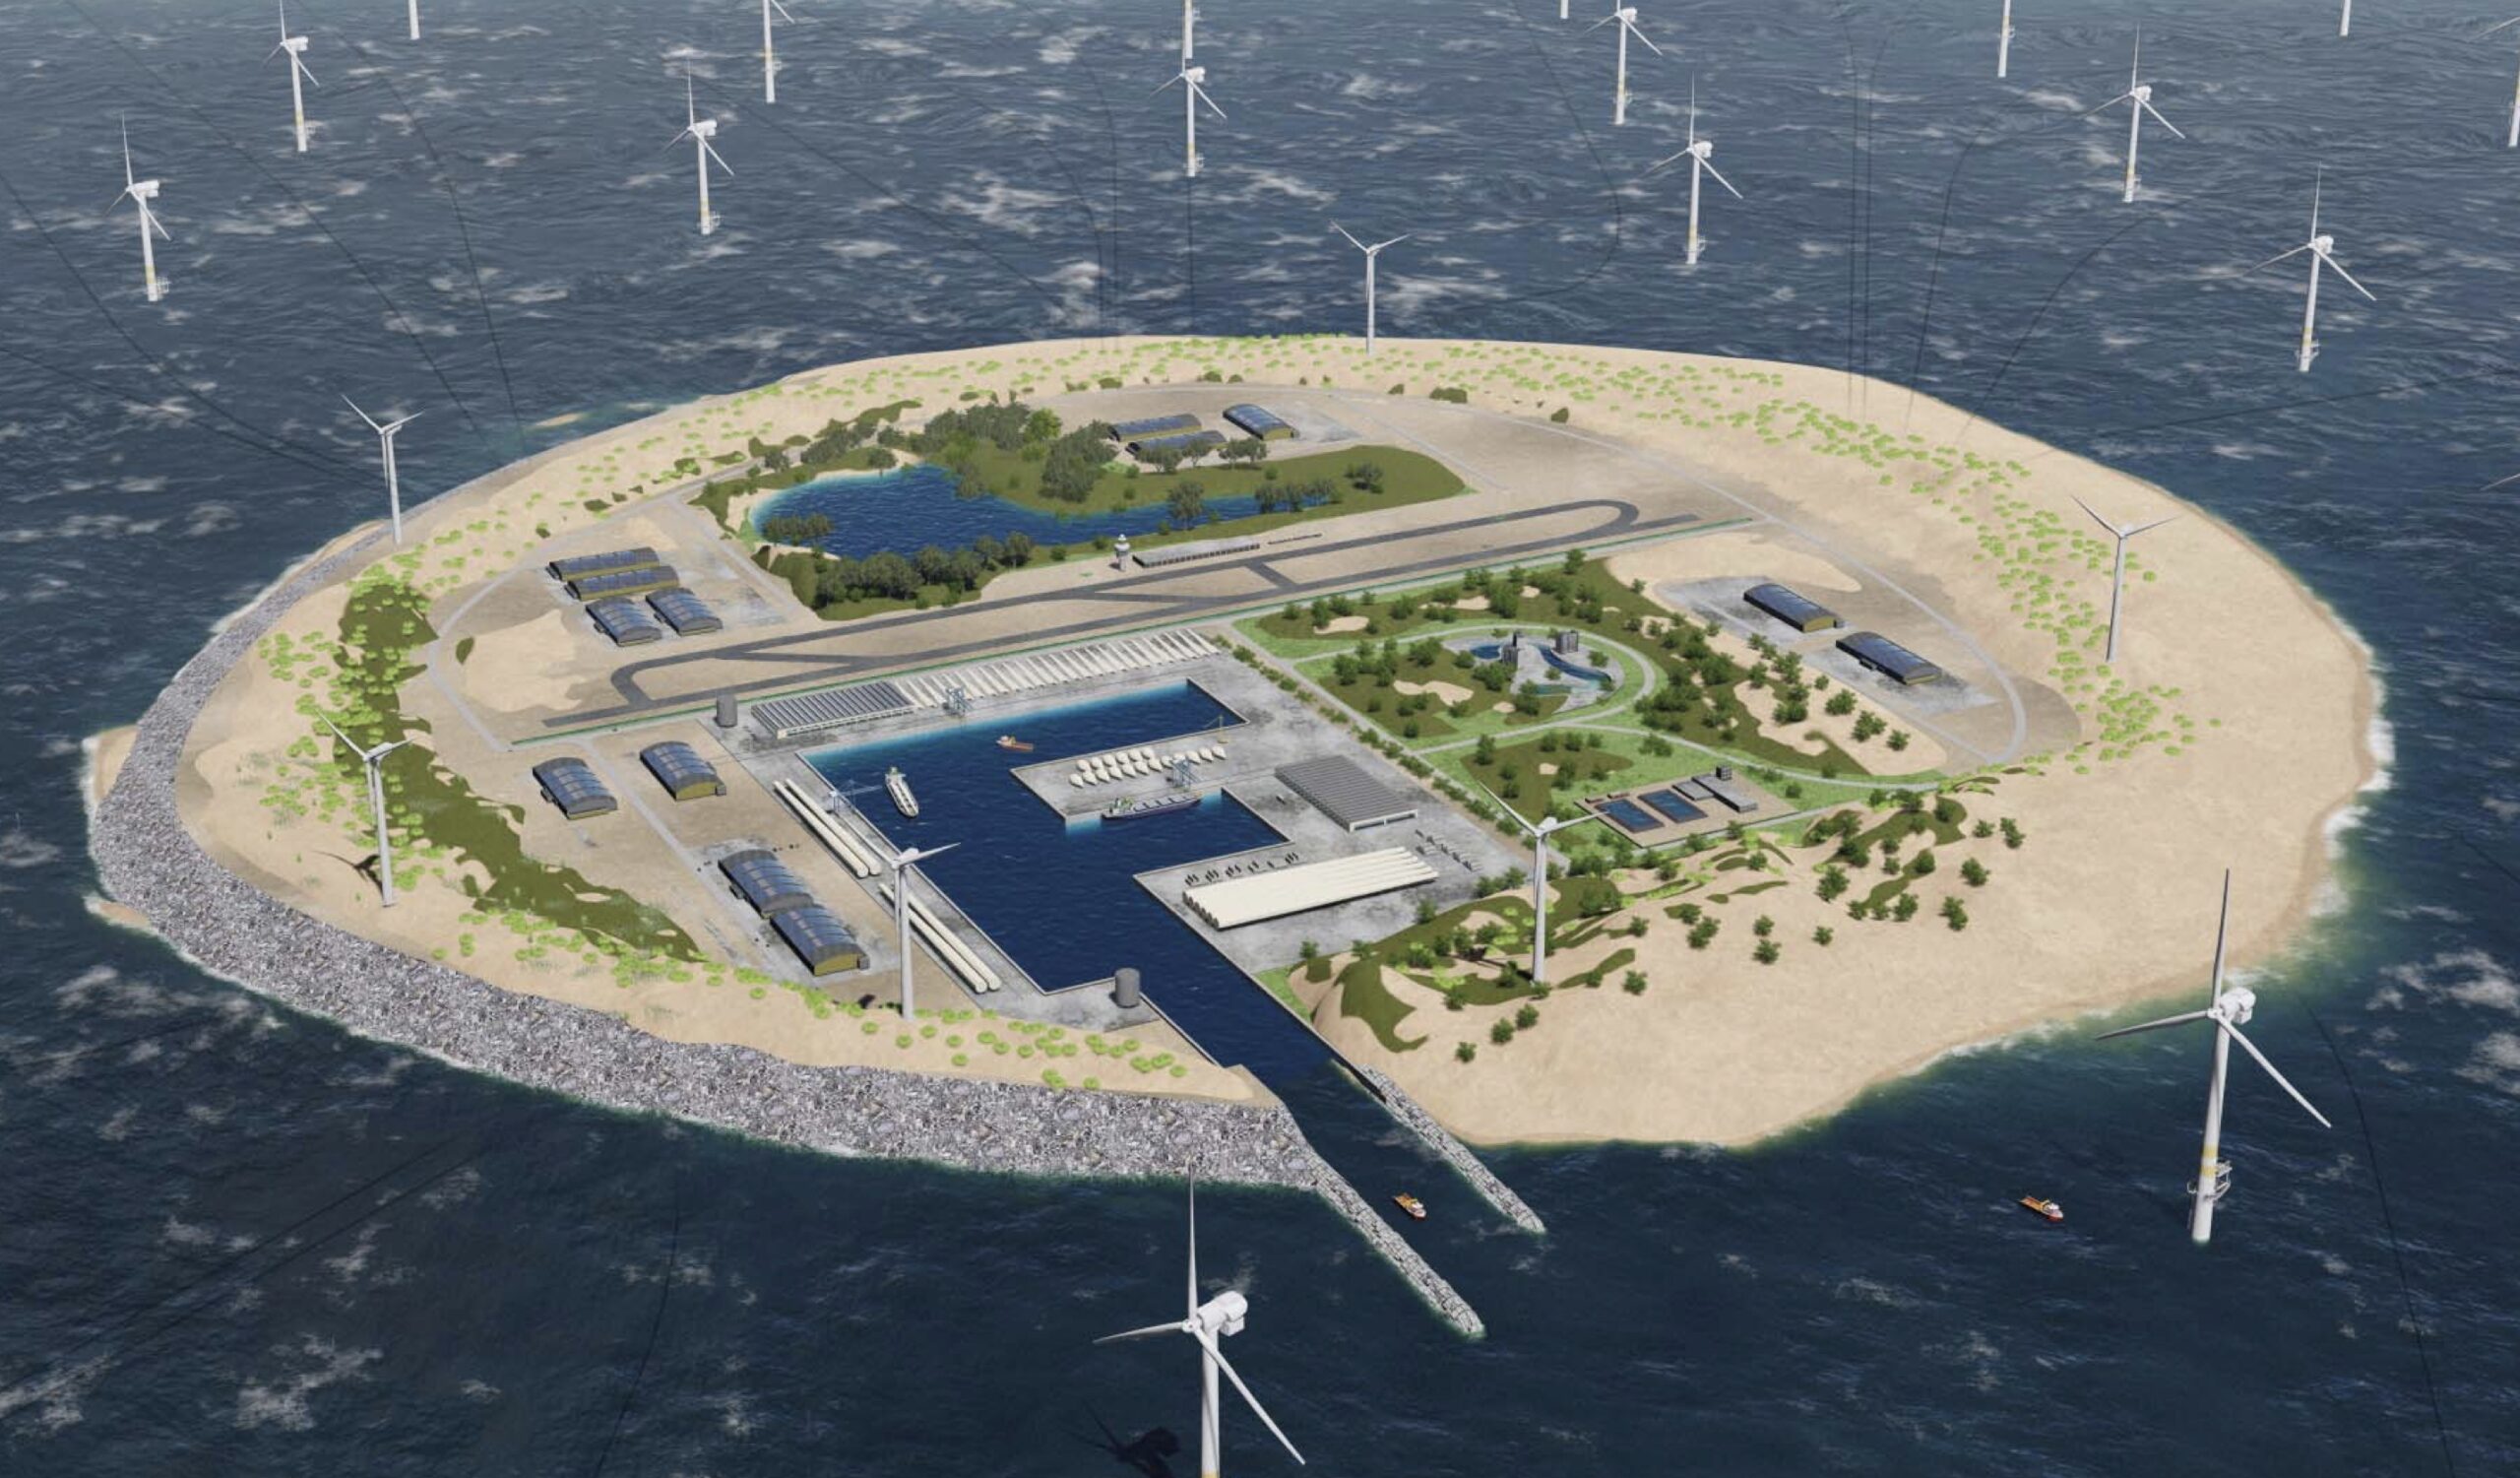 Energy islands, hydrogen, and sustainable mobility to push Europe's green transition